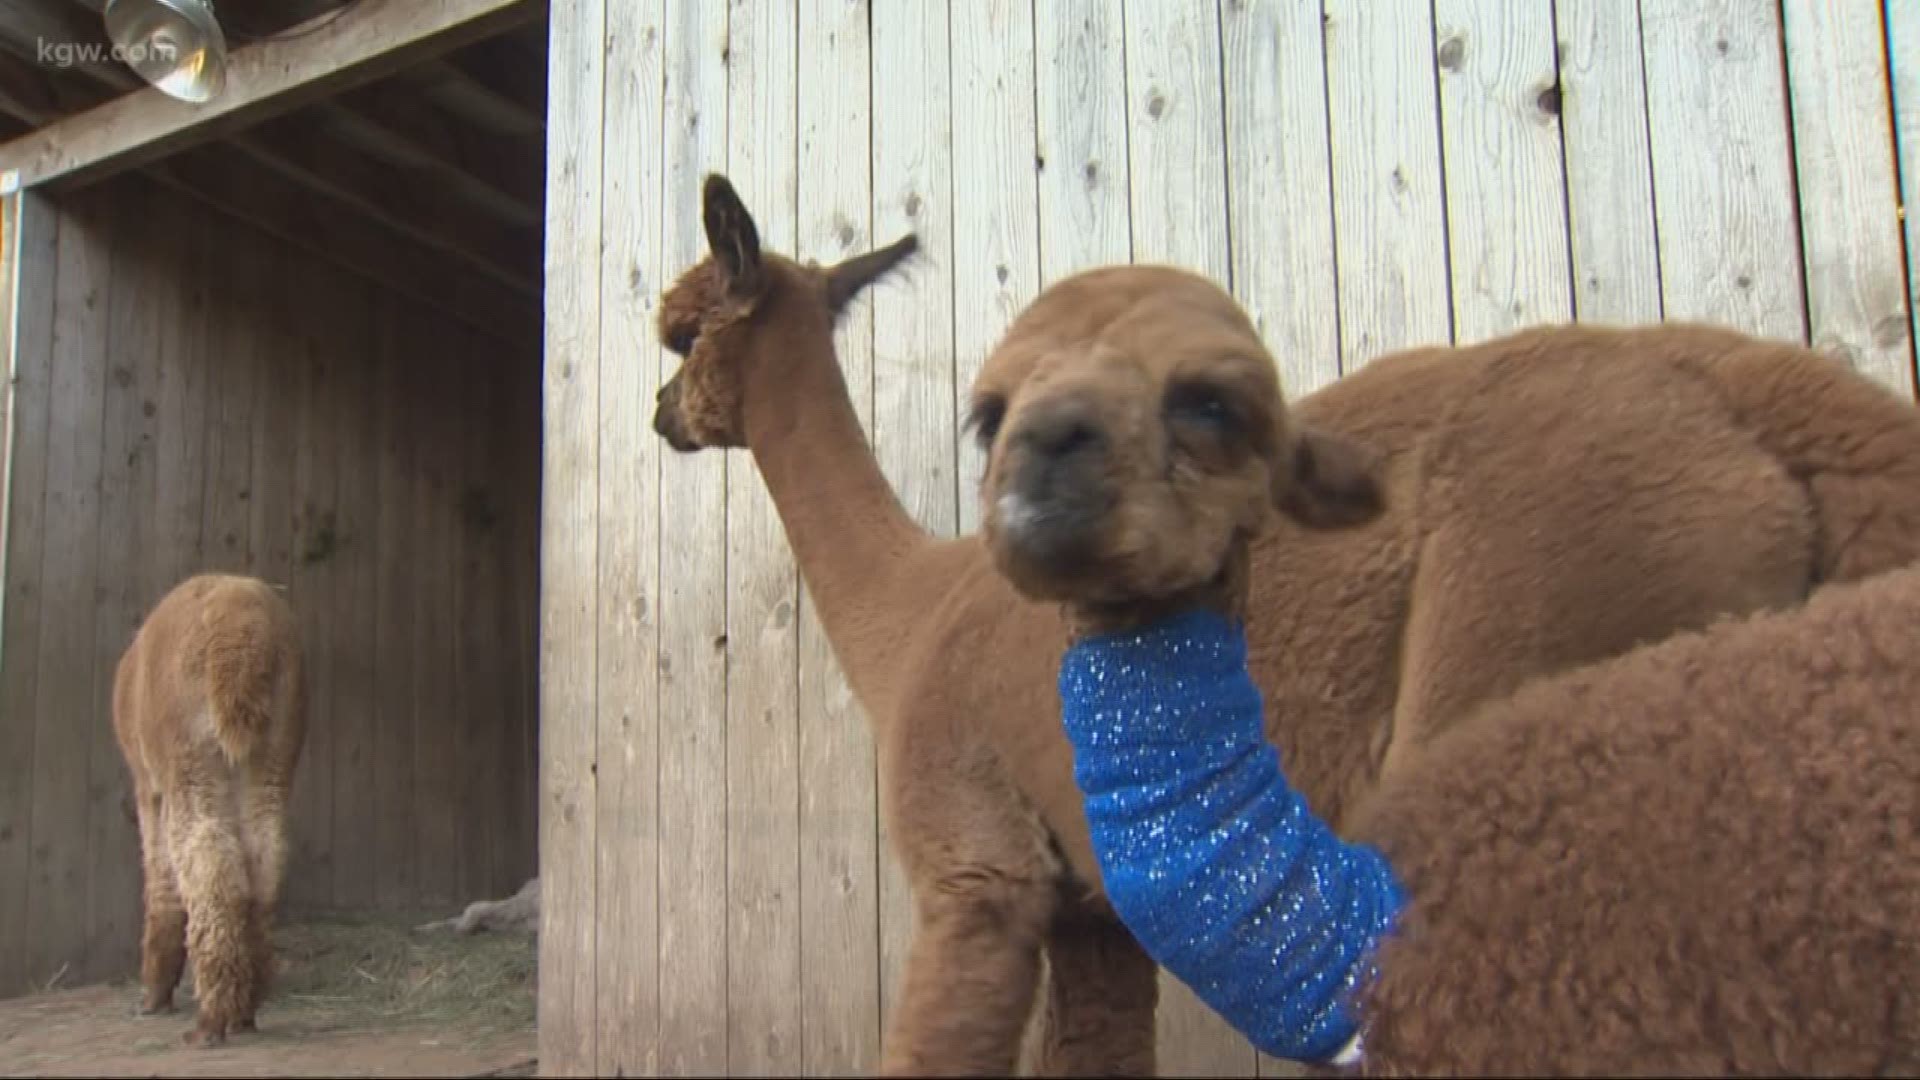 Baby alpaca missing since Tuesday needs its mother, farmer says